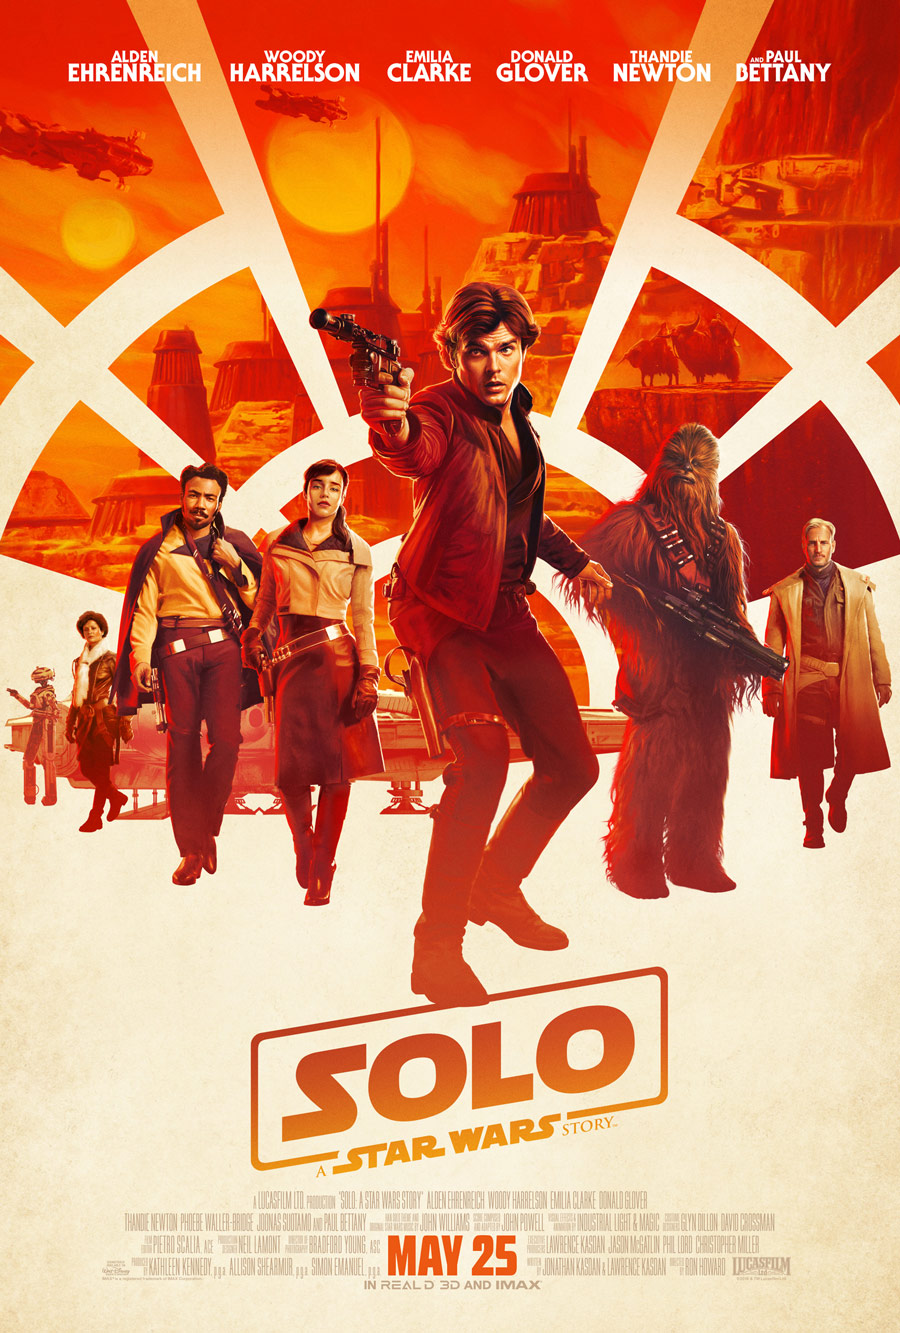 31 Years Later We See How It Started In Solo: A Star Wars Story